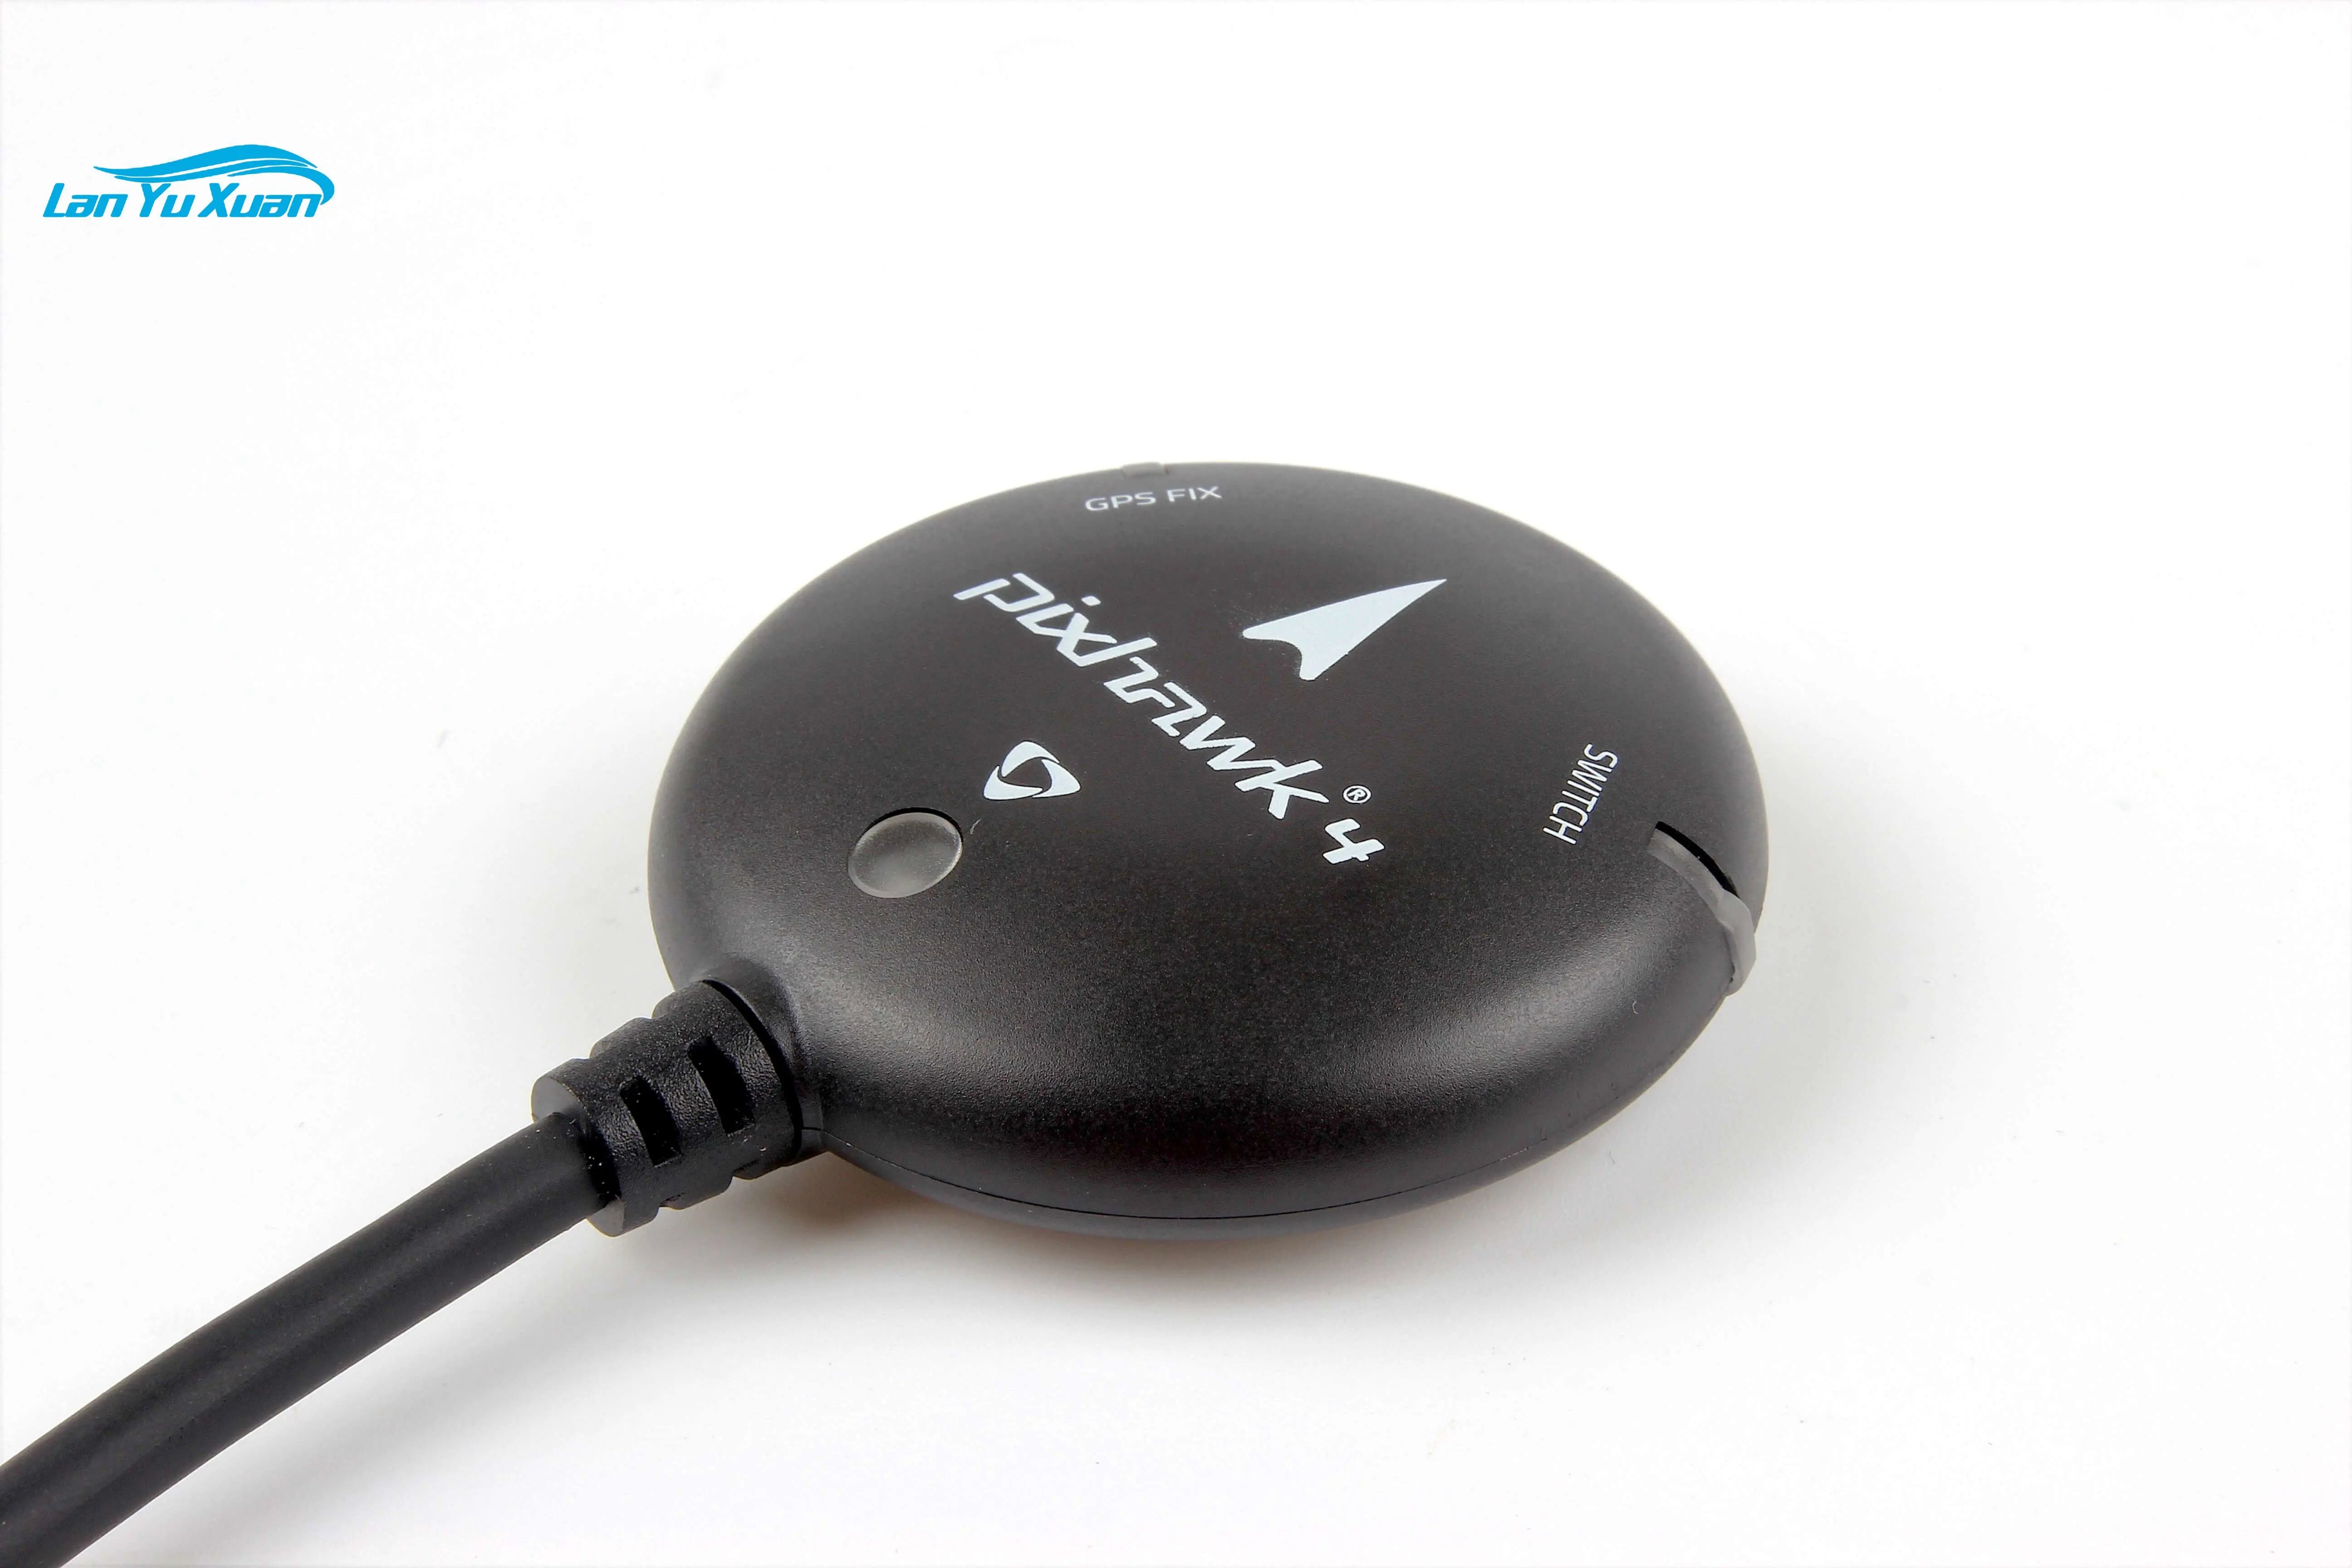 Pixhawk 4 GPS, if you need other models of this product, please contact my WhatsApp +86 156 08